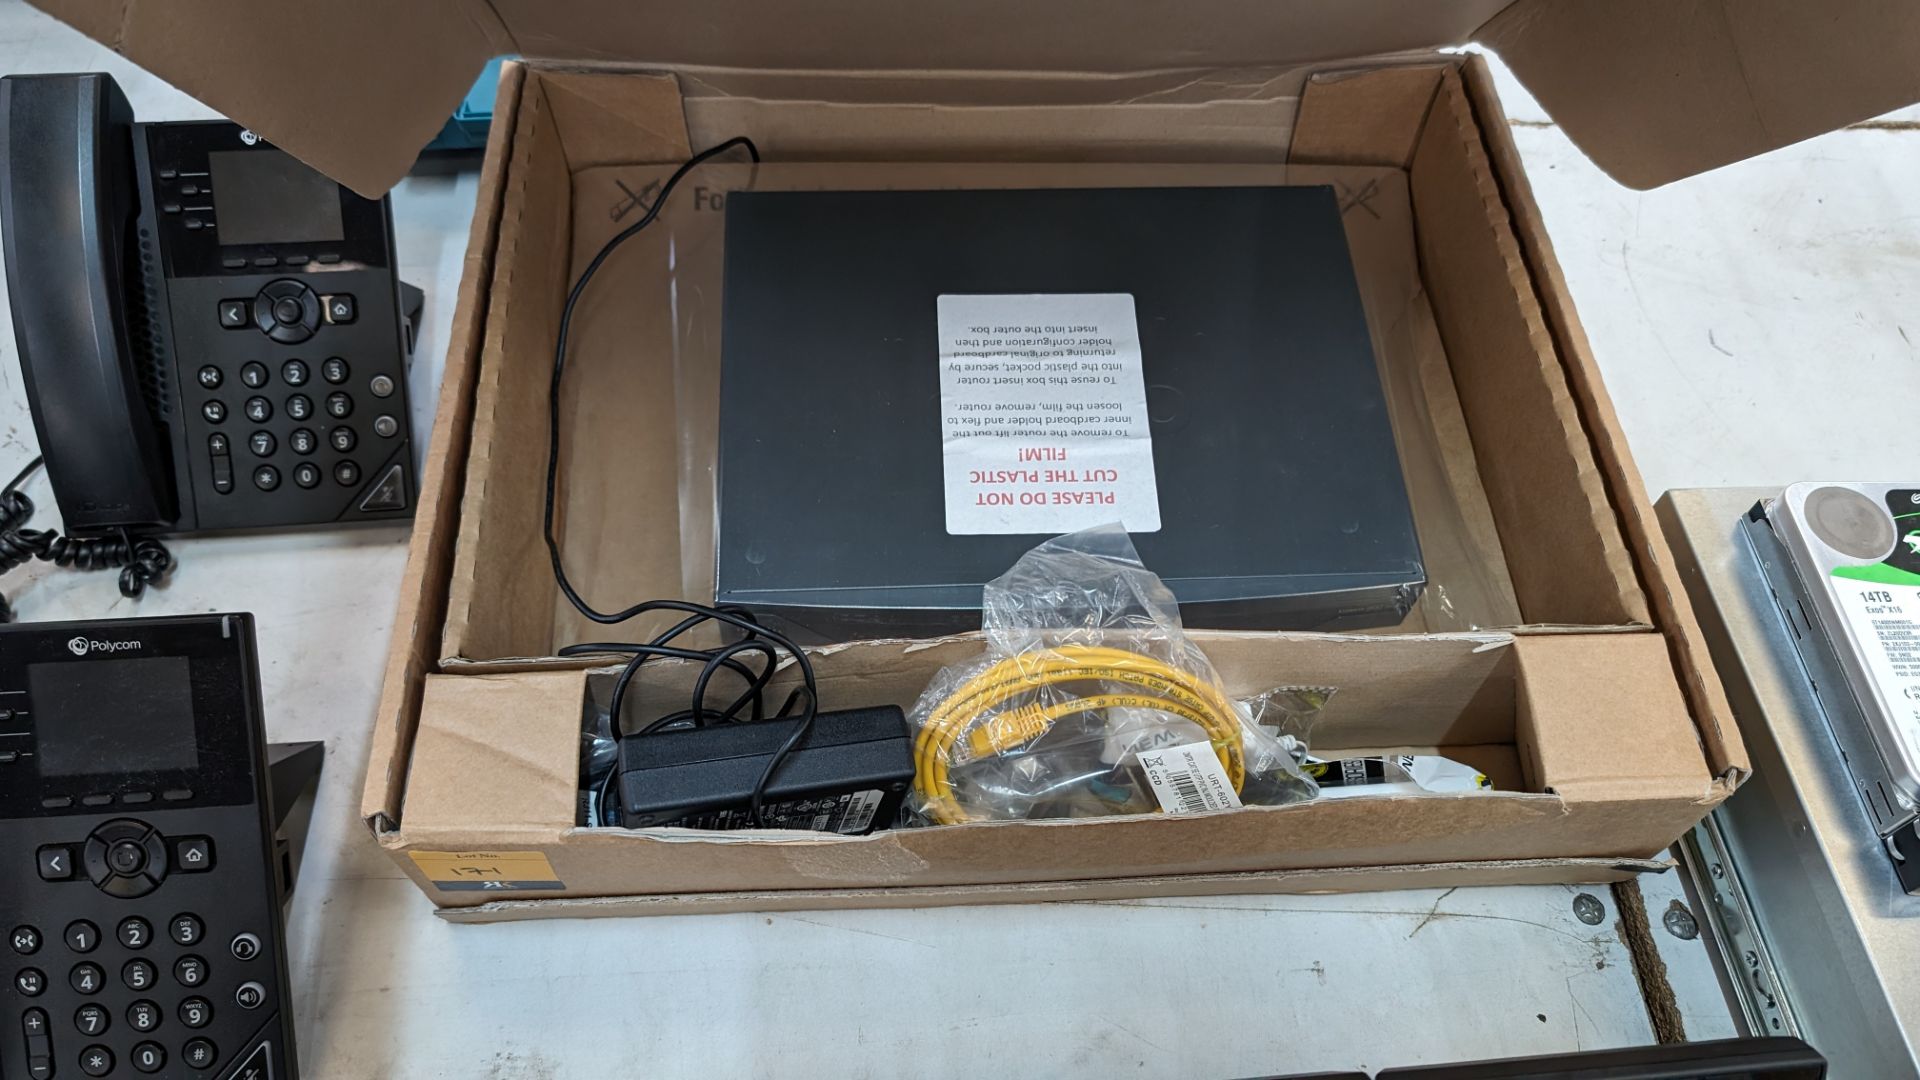 Cisco 887VAM broadband router including power pack & cables - appears to be new/unused